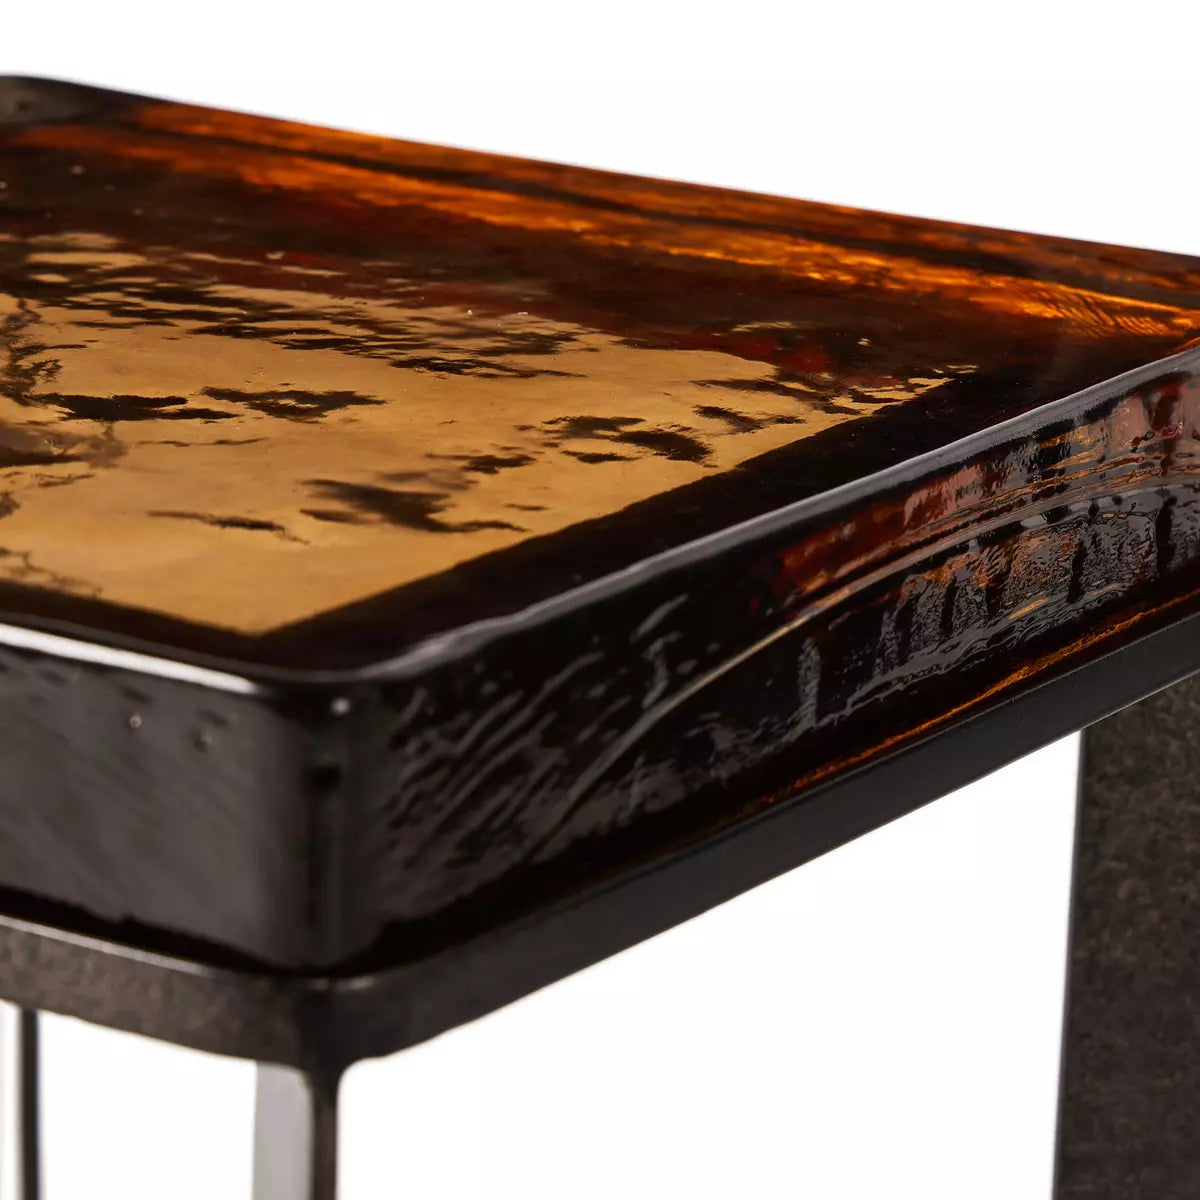 Amber Cast Glass End Table